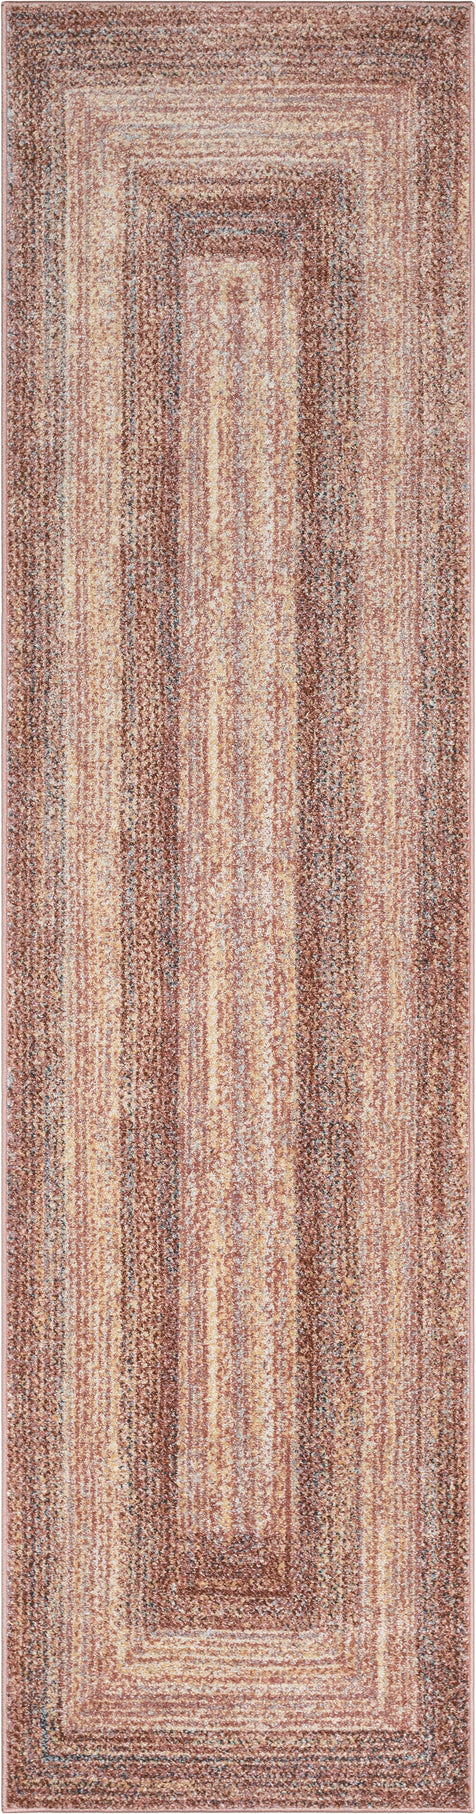 Chindi Bohemian Vintage Solid & Striped Multi-Color Blush Yellow Braided Pattern Rug